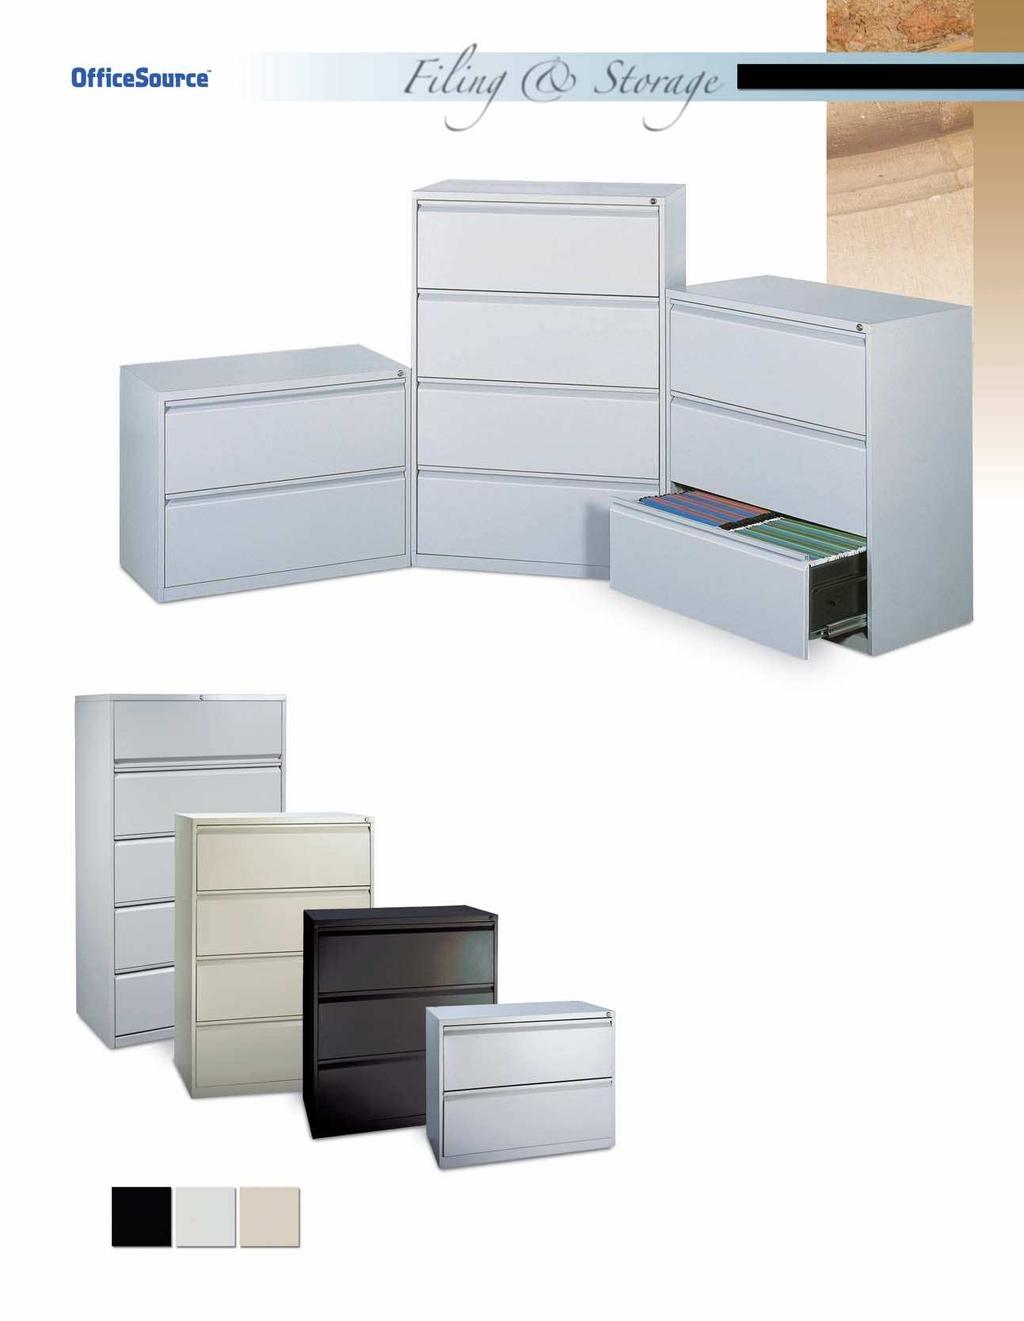 8000 Series Mechanical innerlock inhibits more than one drawer from opening at a time. Reinforced, heavy-gauge construction. Full-width integral pulls.